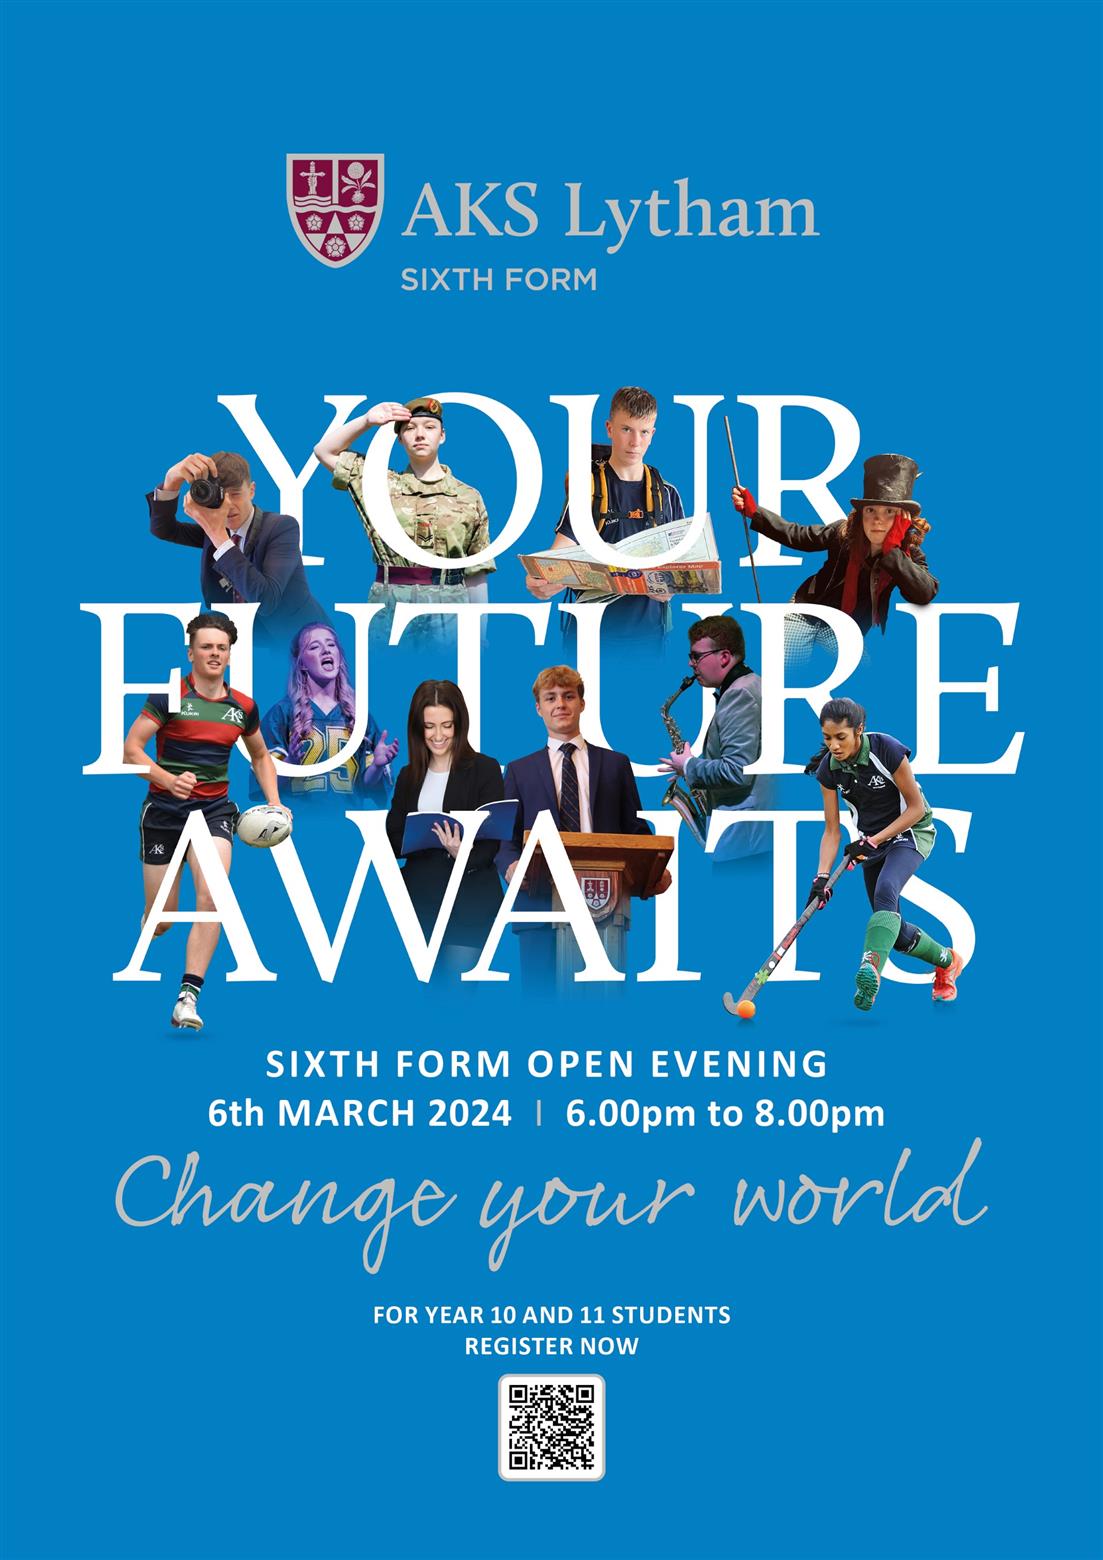 Sixth Form Open Evening: 6th March